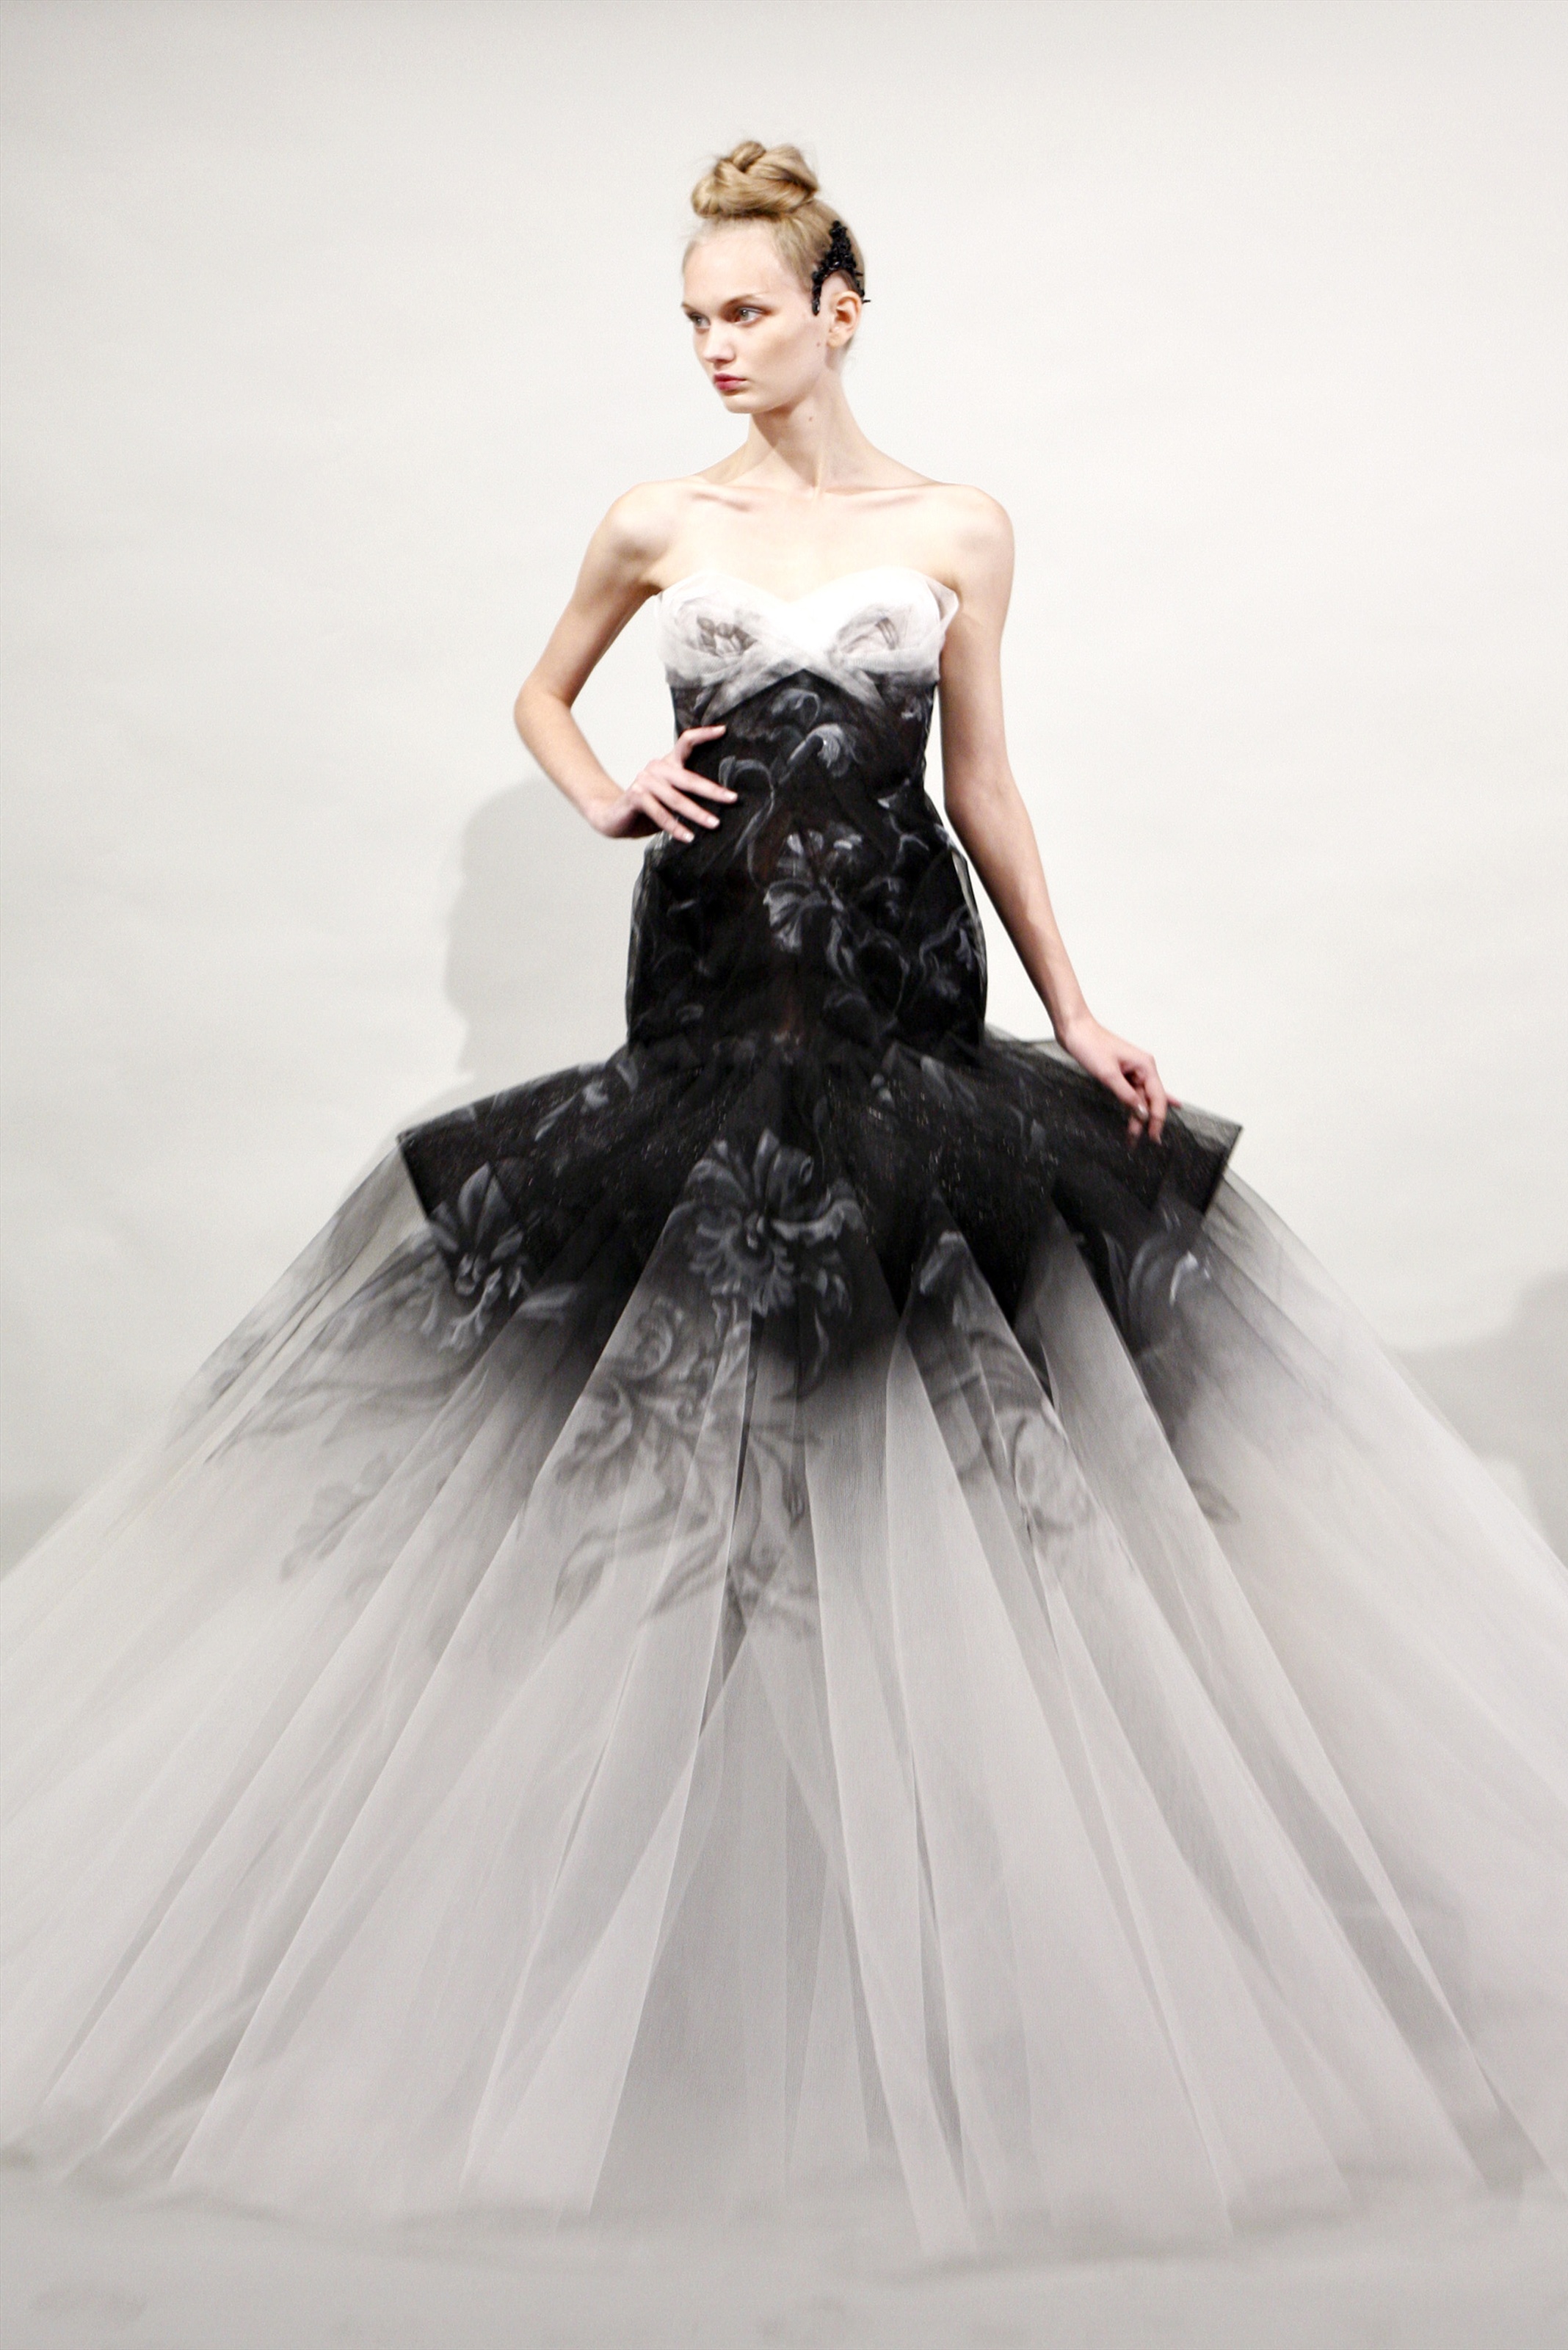 Black and white wedding dress by Marchesa